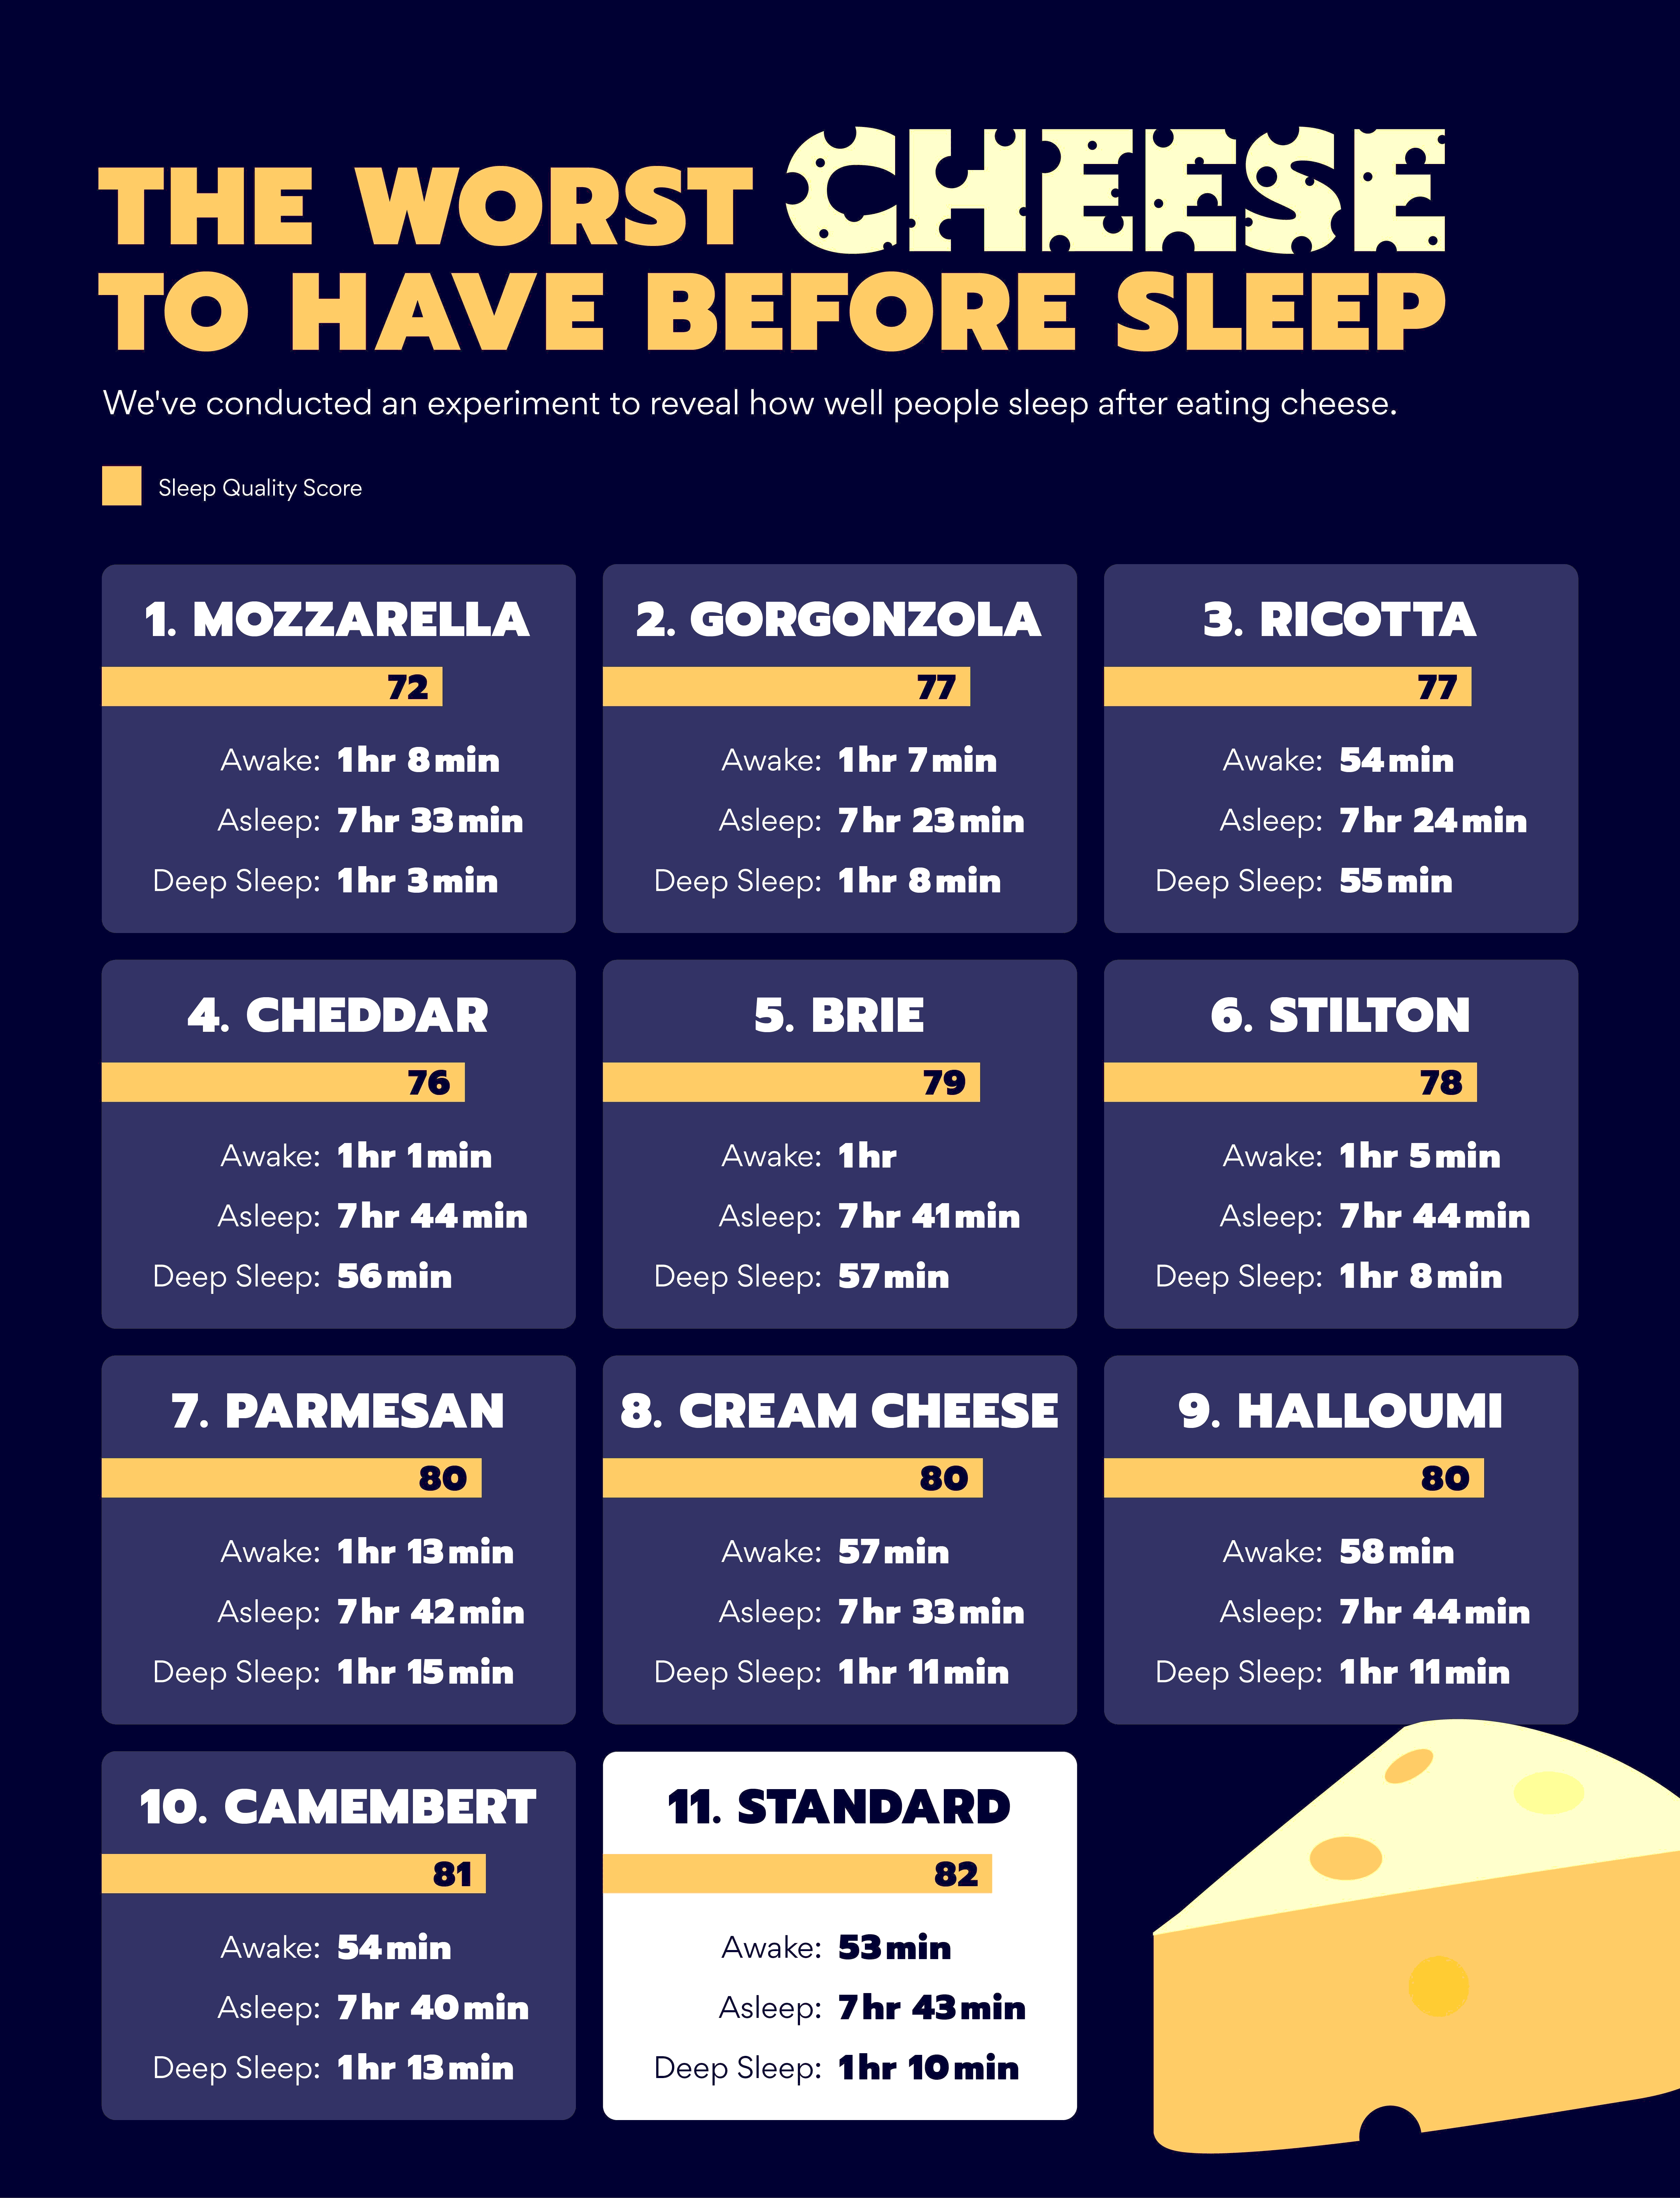 Which cheese impacts our sleep the most?